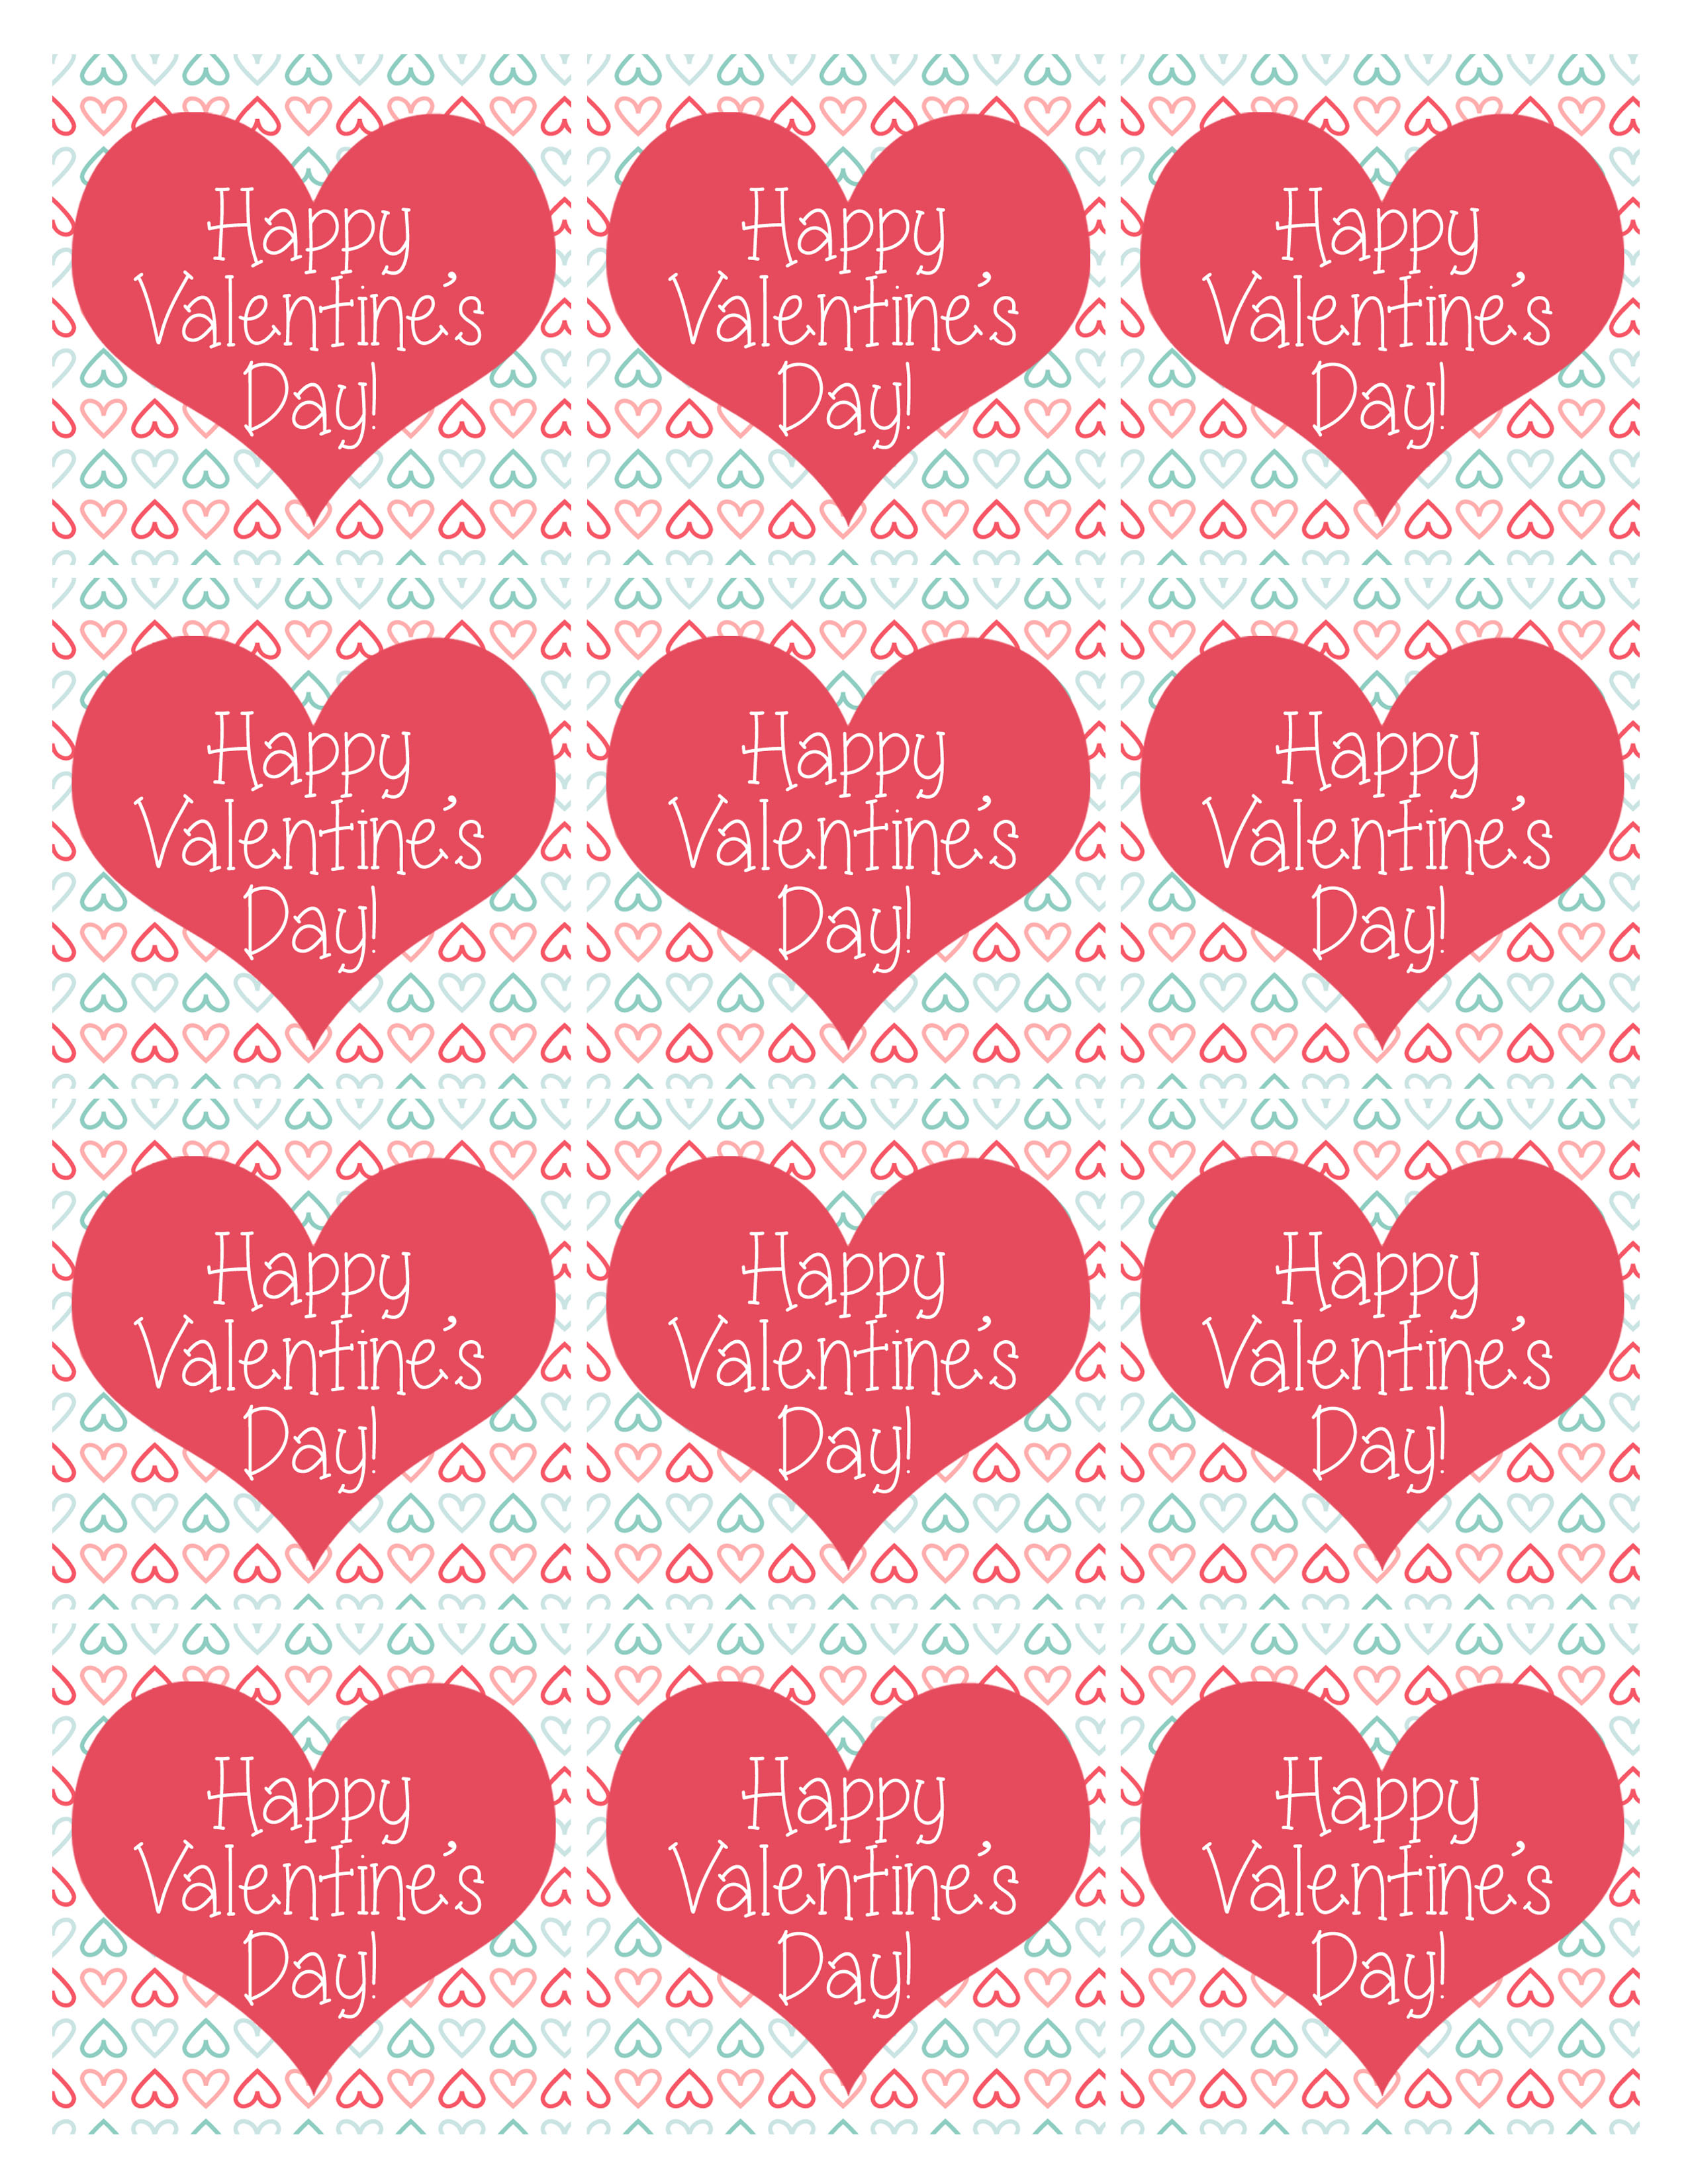 6-best-images-of-happy-valentine-s-day-printable-tag-valentine-s-day